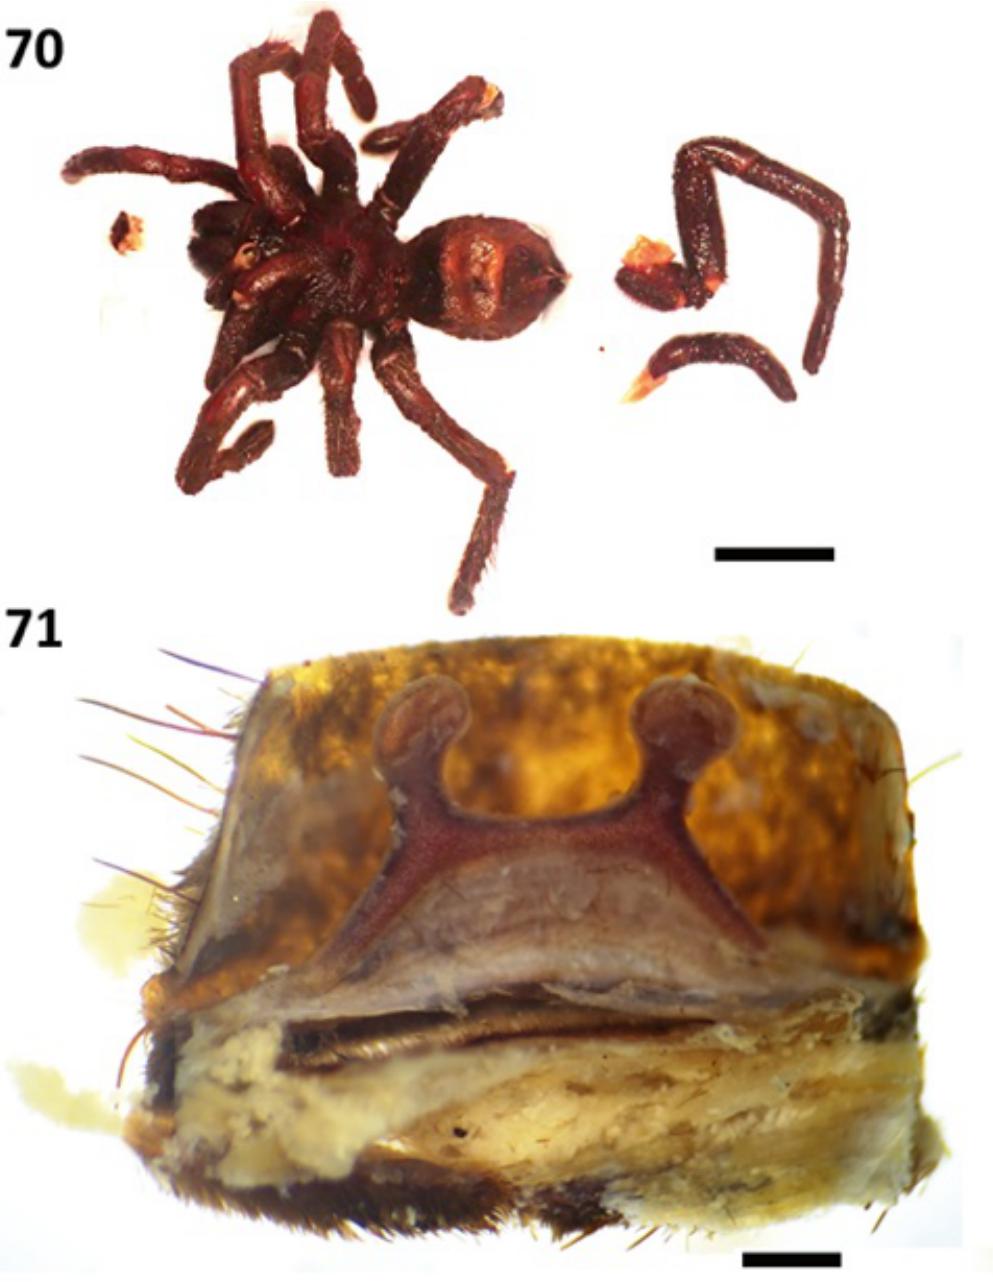 and missing notes 1901 sex, species description Pocock, Theraphosidae) in Pamphobeteus and taxonomic with new a Megaphobema records, (Araneae: 1901: changes of redescriptions, Pocock,